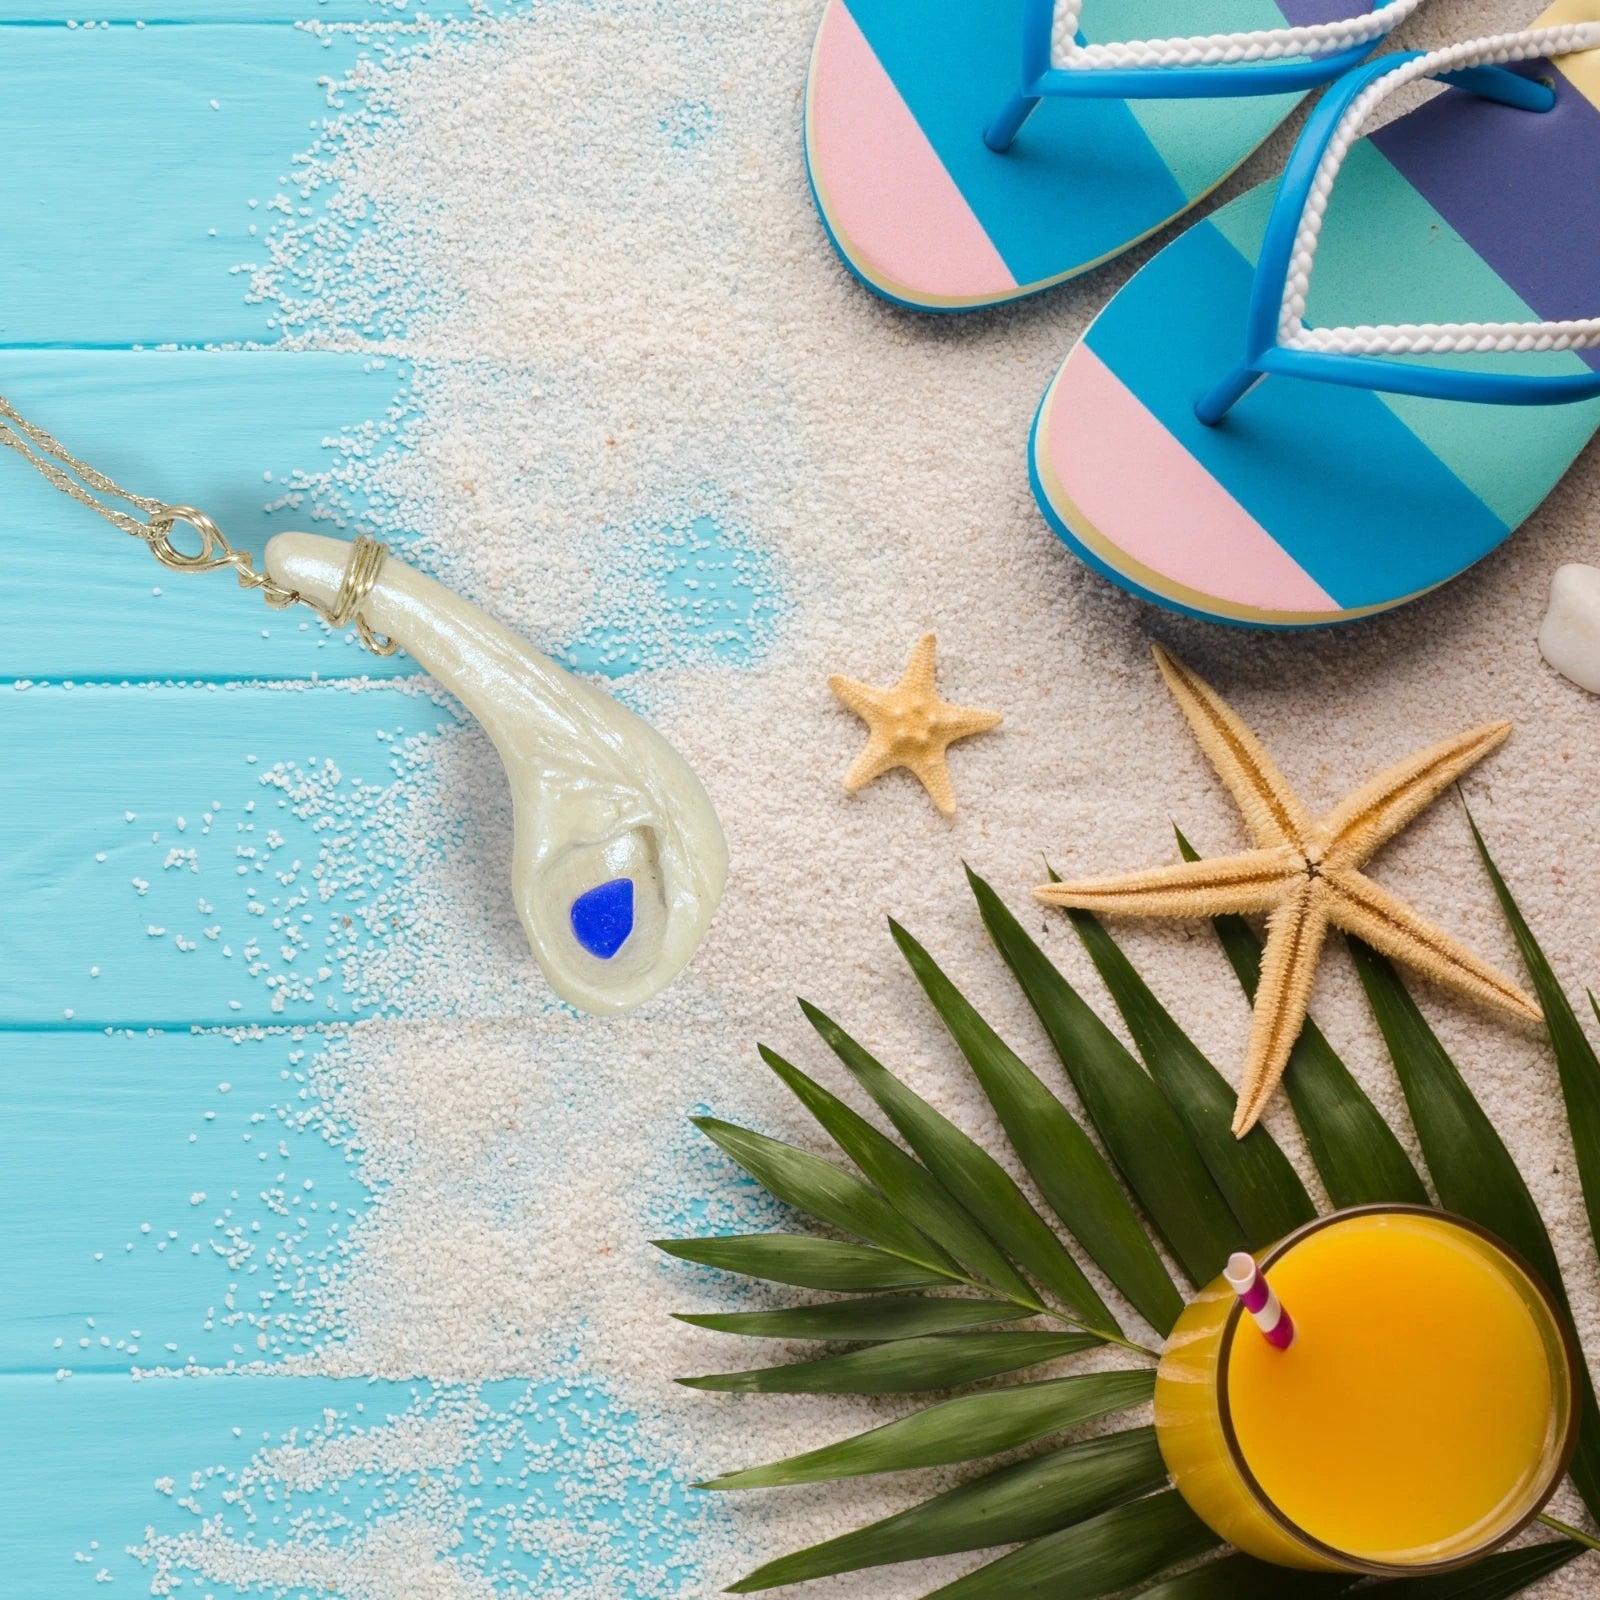 The beautiful blue of the sea glass in this pendant called Cobalt would be a perfect addition to your summer wardrobe.  The pendant is shown on a deck with complimentary coloured sandals, starfish, sand and a refreshing orange drink.  Summer vibes.